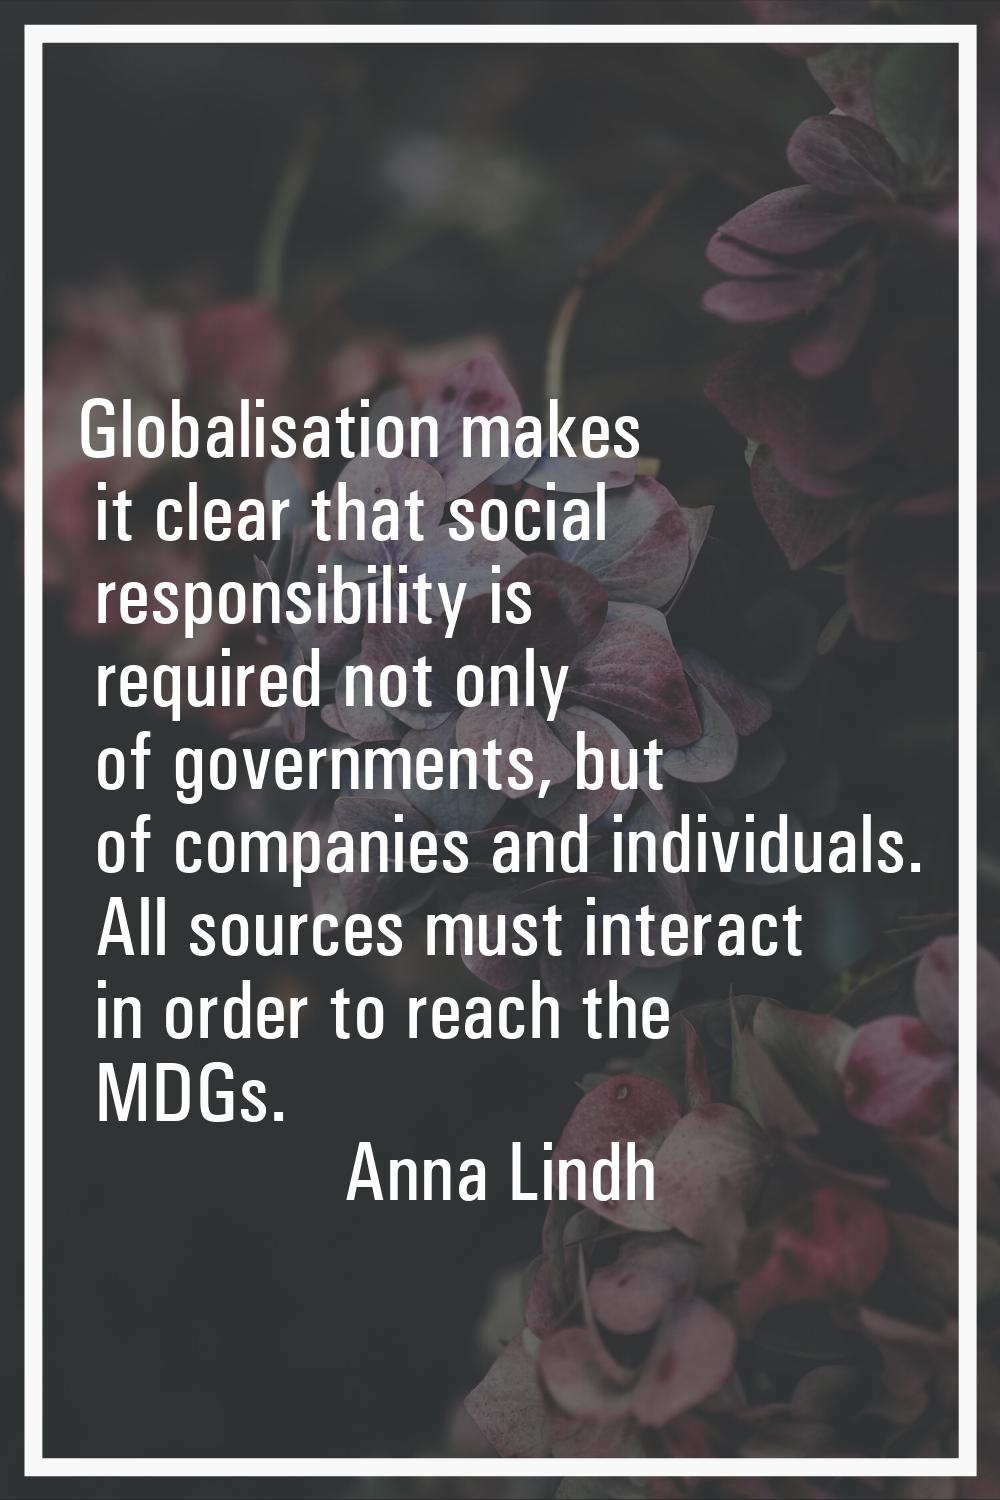 Globalisation makes it clear that social responsibility is required not only of governments, but of